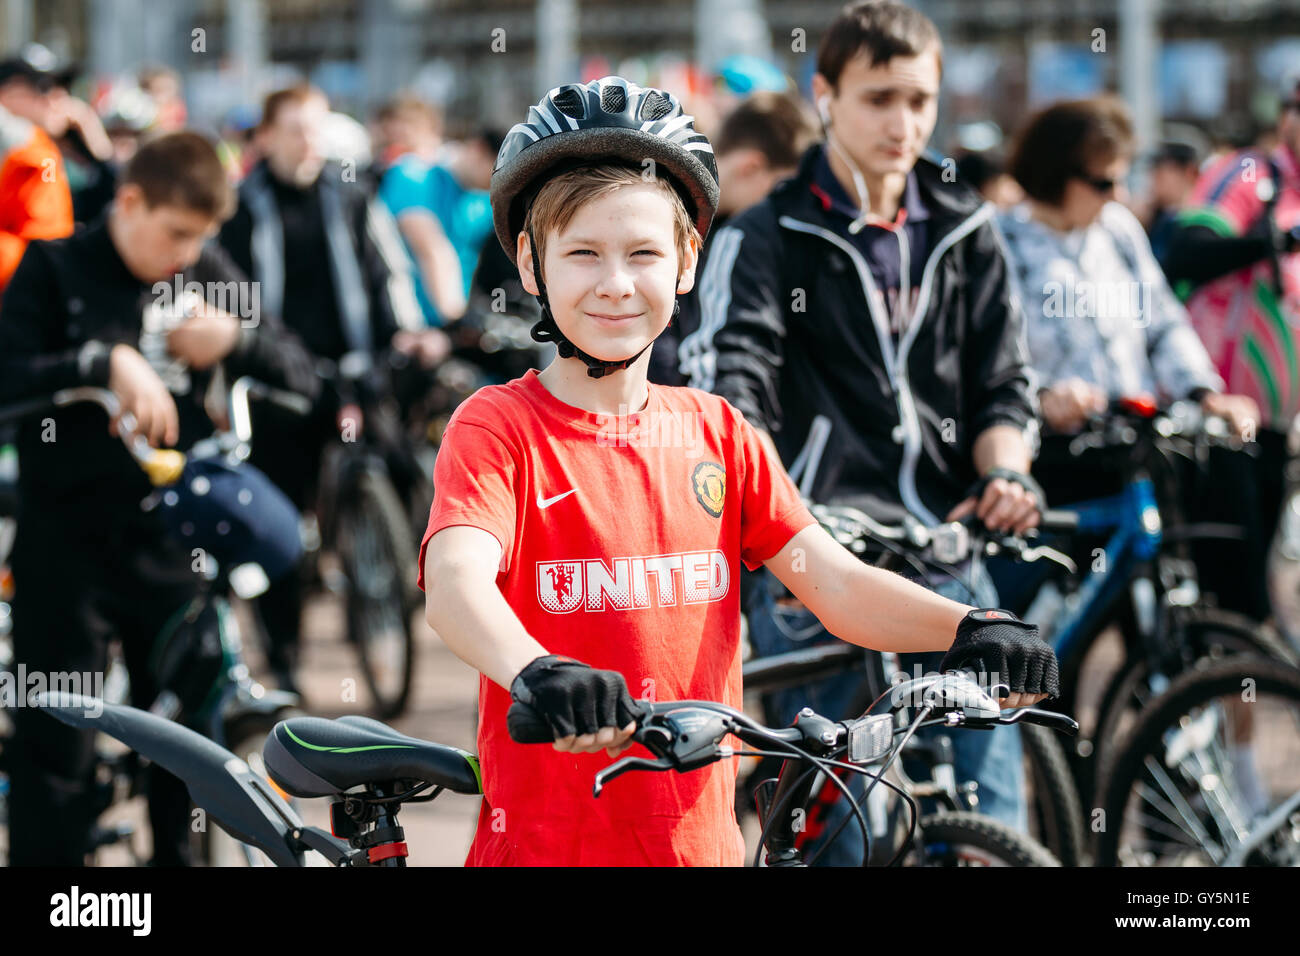 Gomel, Belarus - April 10, 2015: Boy at opening of the cycling season in the city Stock Photo